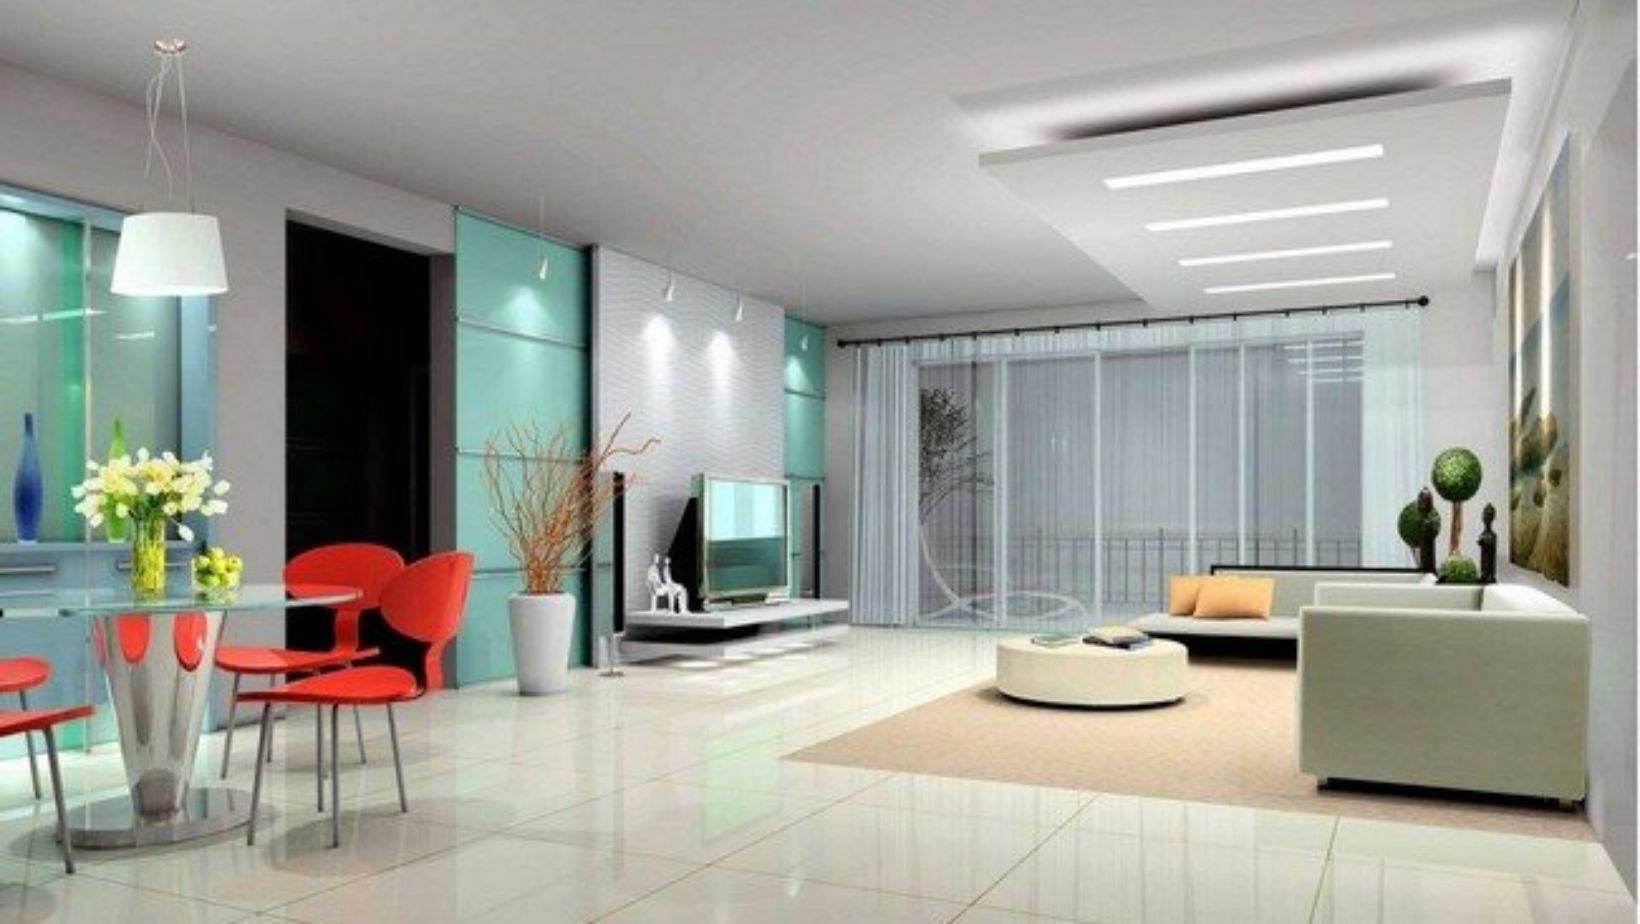 Why Should You Choose LED Strip Light Fixtures for Your Home?